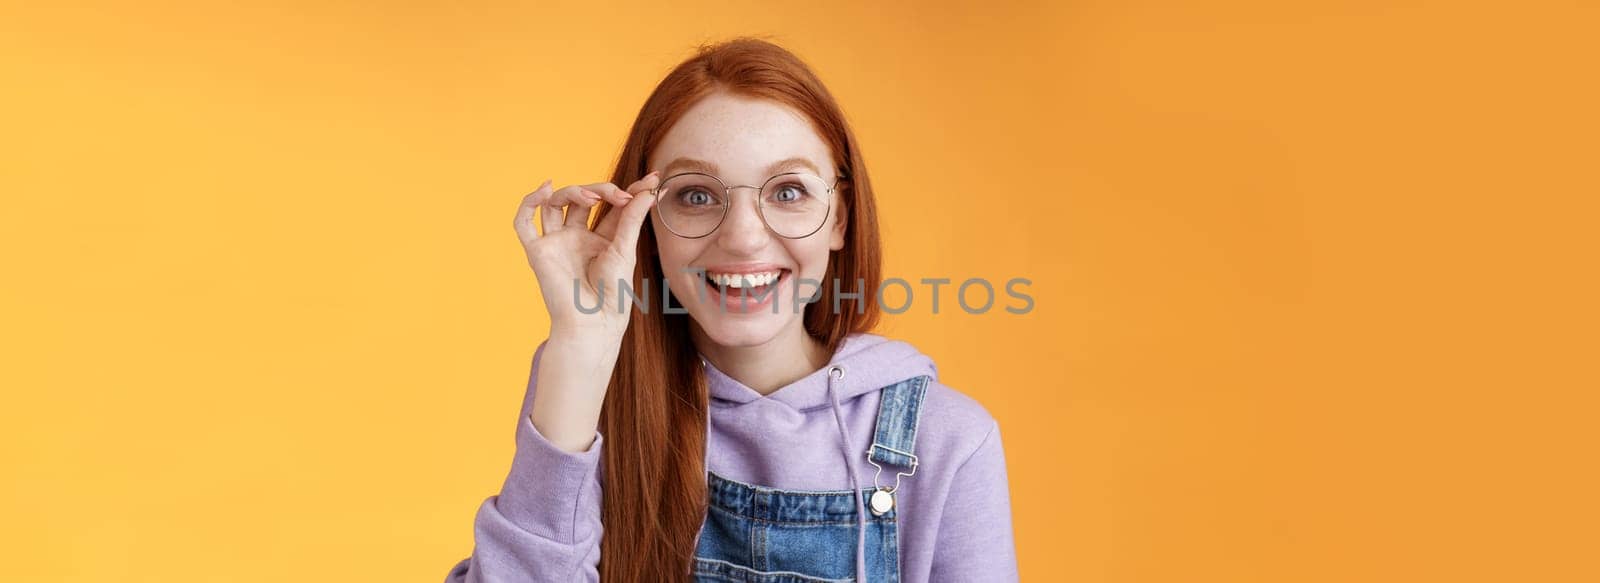 Happy enthusiastic young redhead girl amused find out excellent place celebrate b-day standing joyful excited touch glasses smiling broadly white teeth grinning rejoicing surprised, orange background.